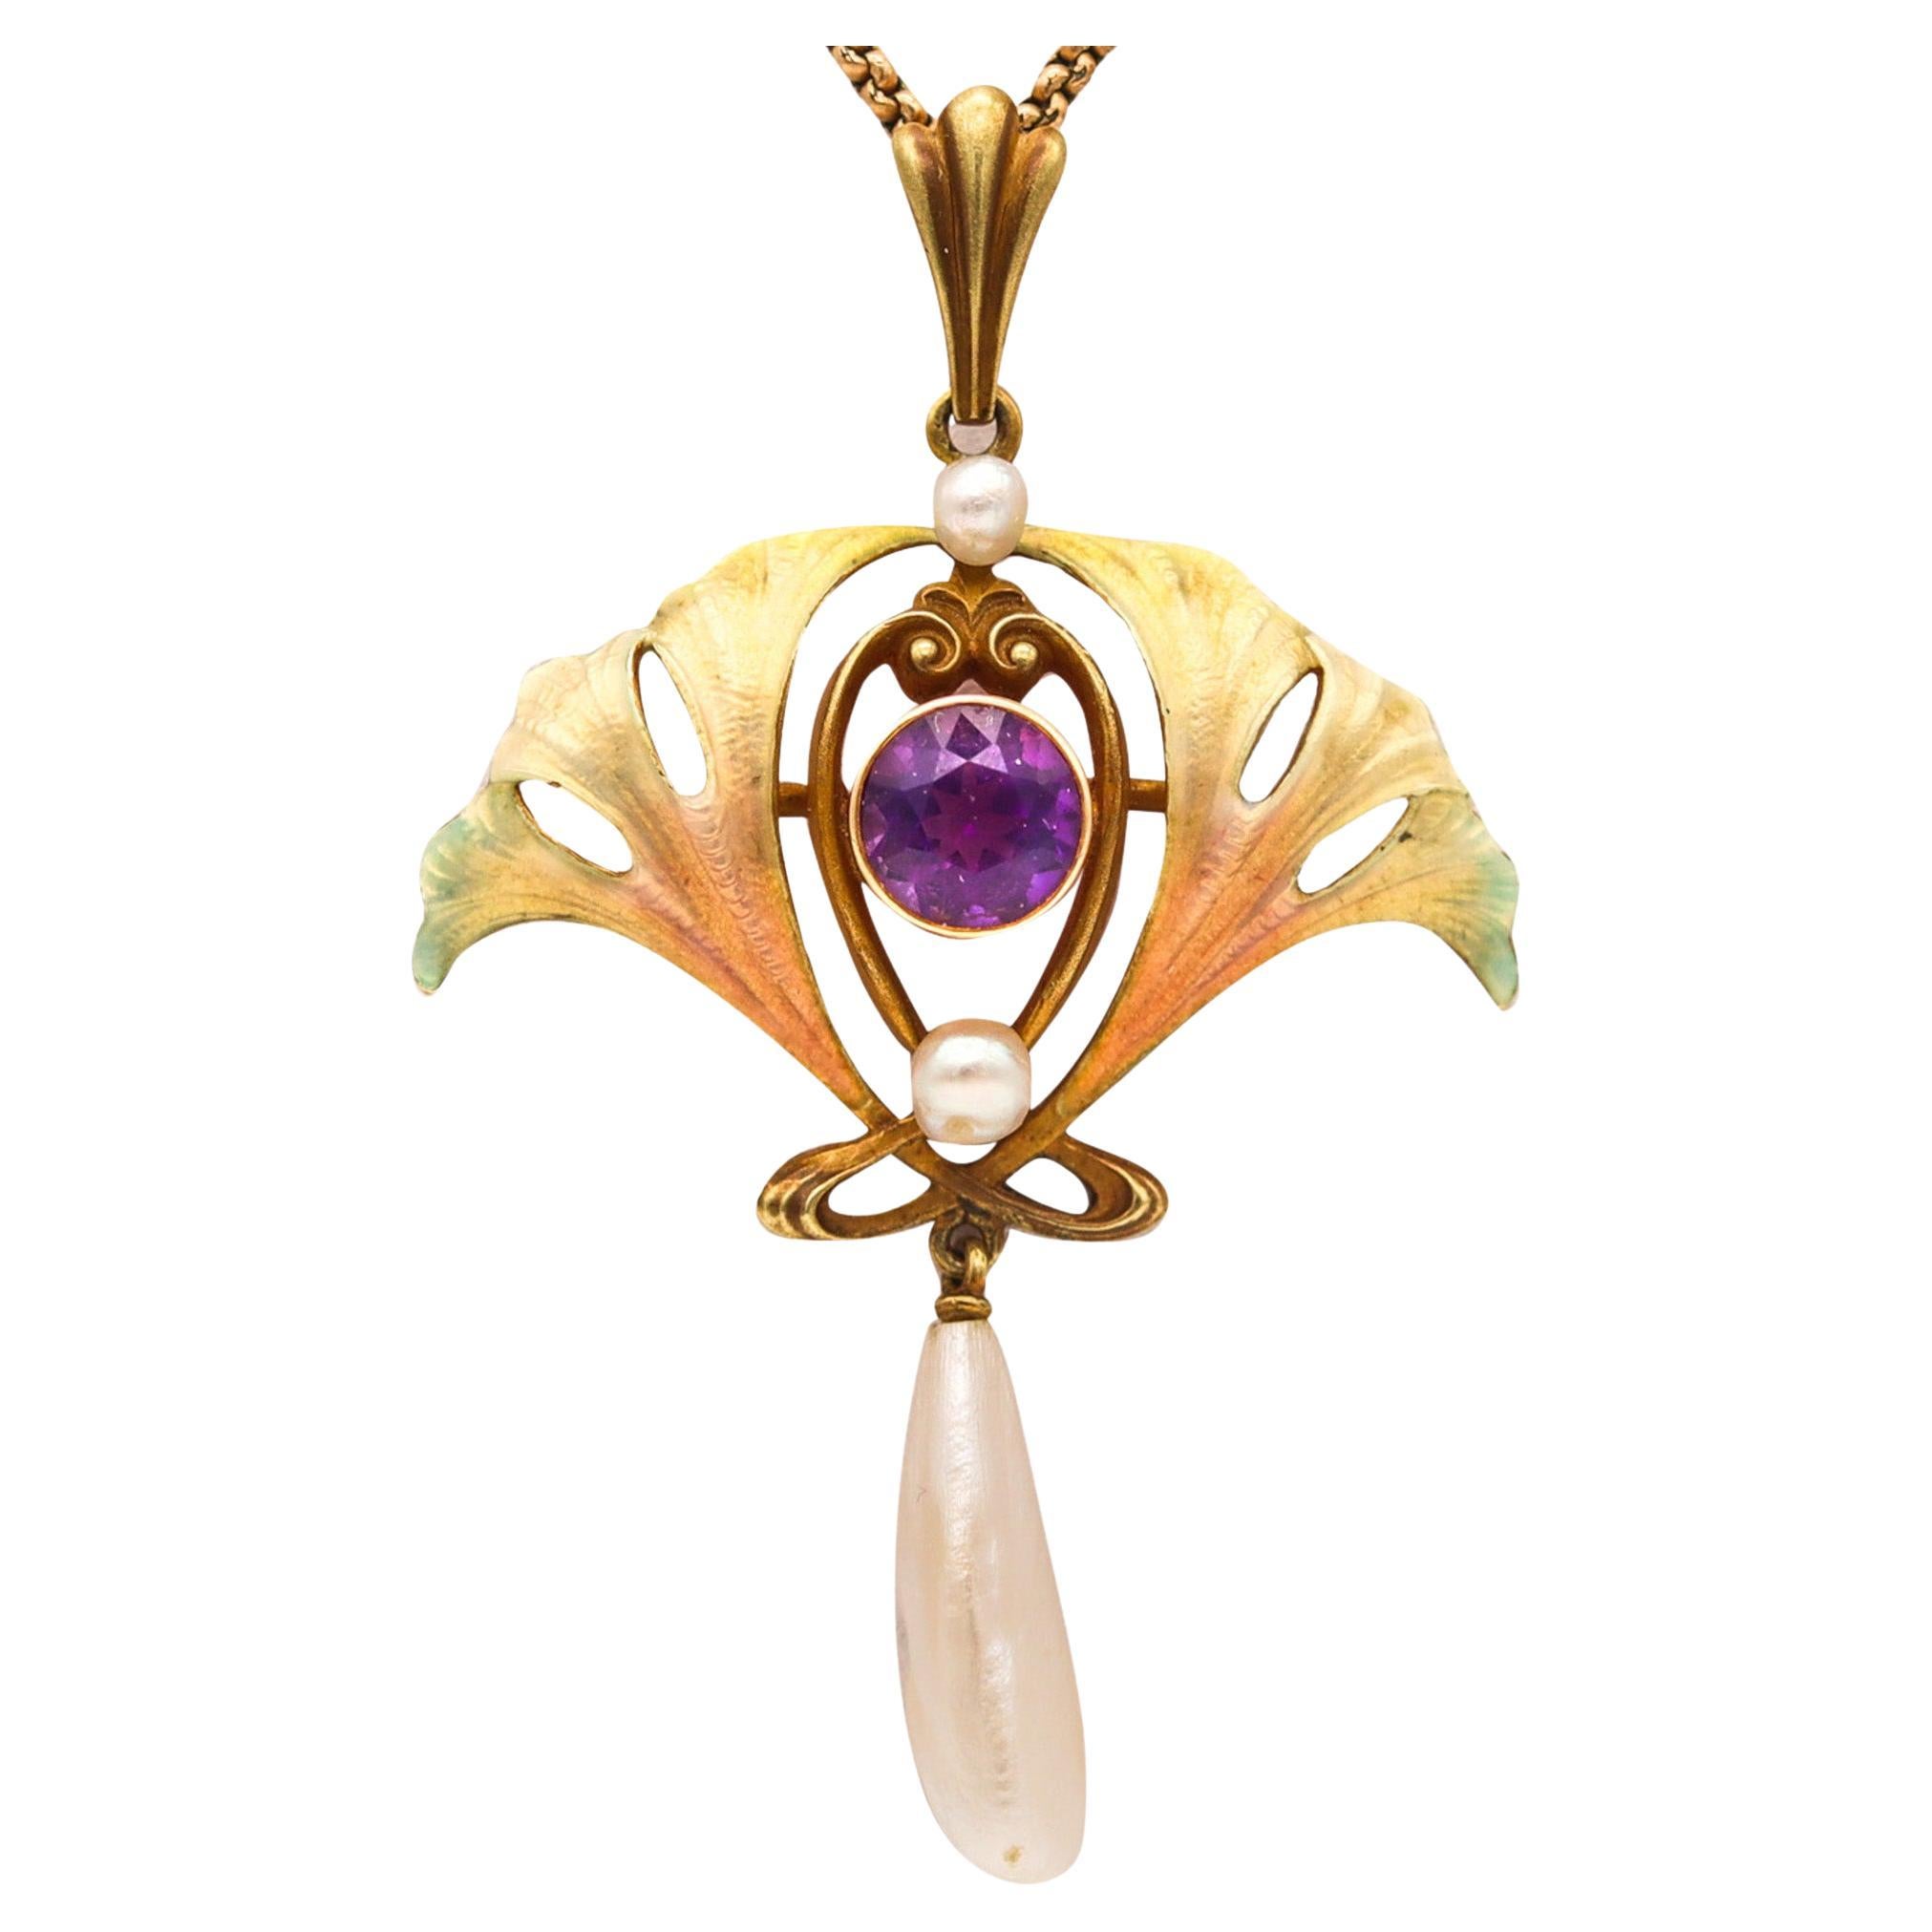 Henry Blank & Co. 1900 Art Nouveau Enameled Necklace In 14Kt Gold With Pearls